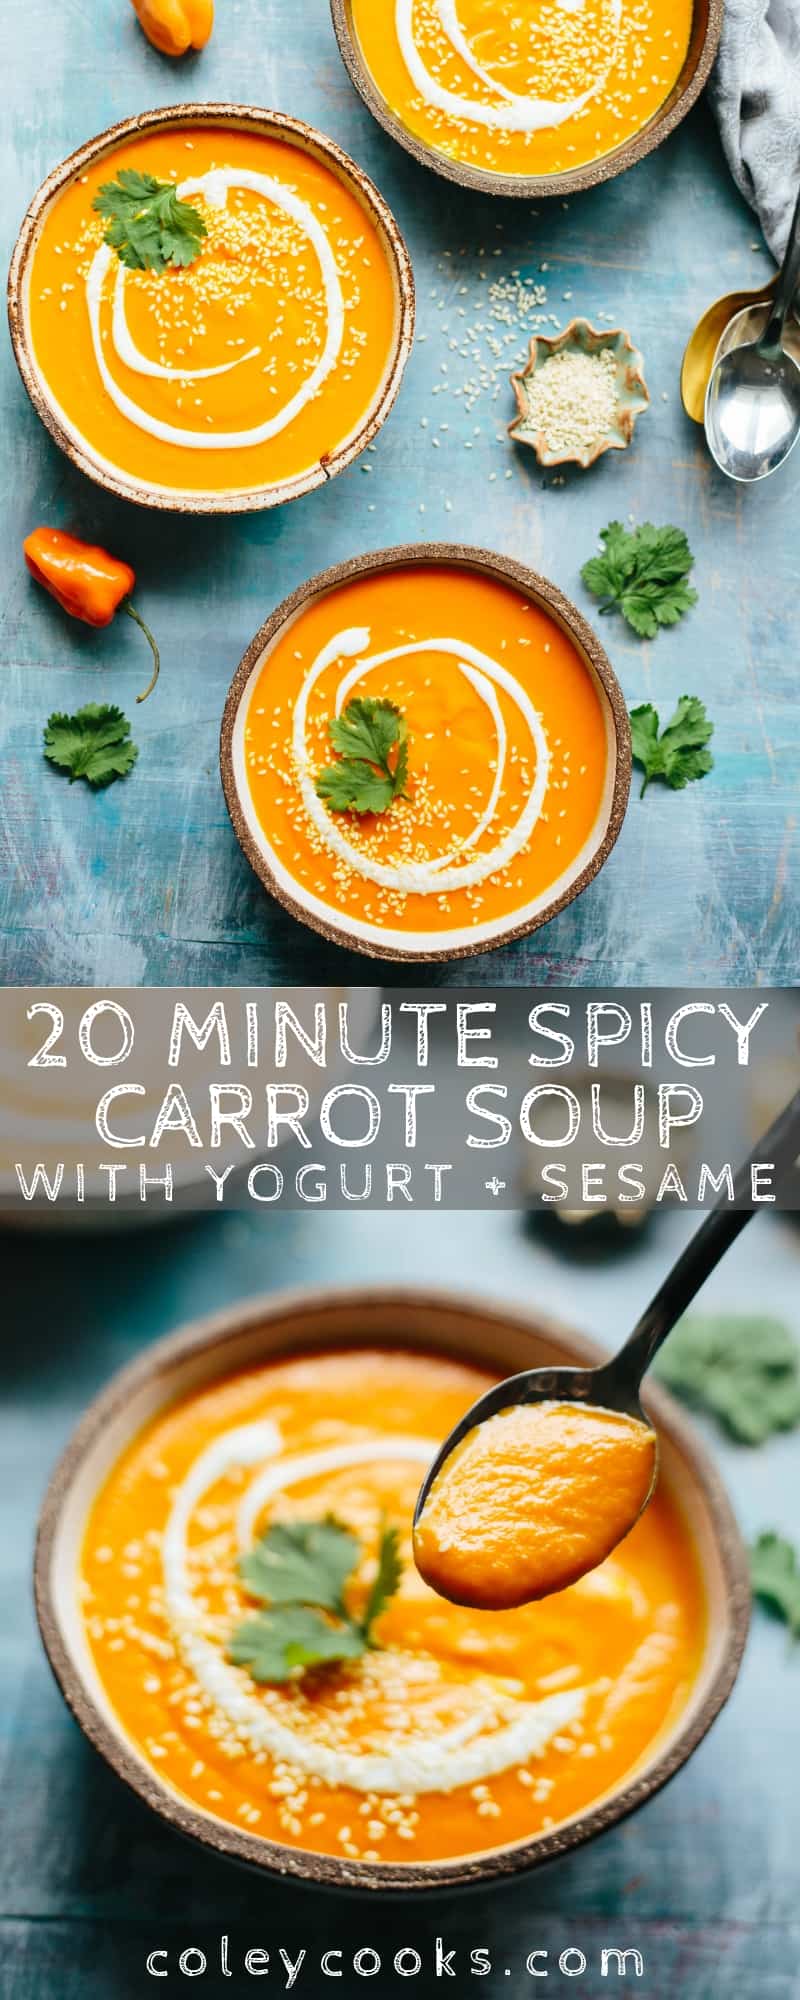 20 Minute Spicy Carrot Soup with Yogurt + Sesame! It's gluten free, vegan friendly, mildly spiced, smooth, creamy and totally delicious! A warming winter soup perfect for snow days! #spicy #easy #carrot #soup #habanero #recipe #yogurt #sesame #glutenfree #vegan #plantbased | ColeyCooks.com